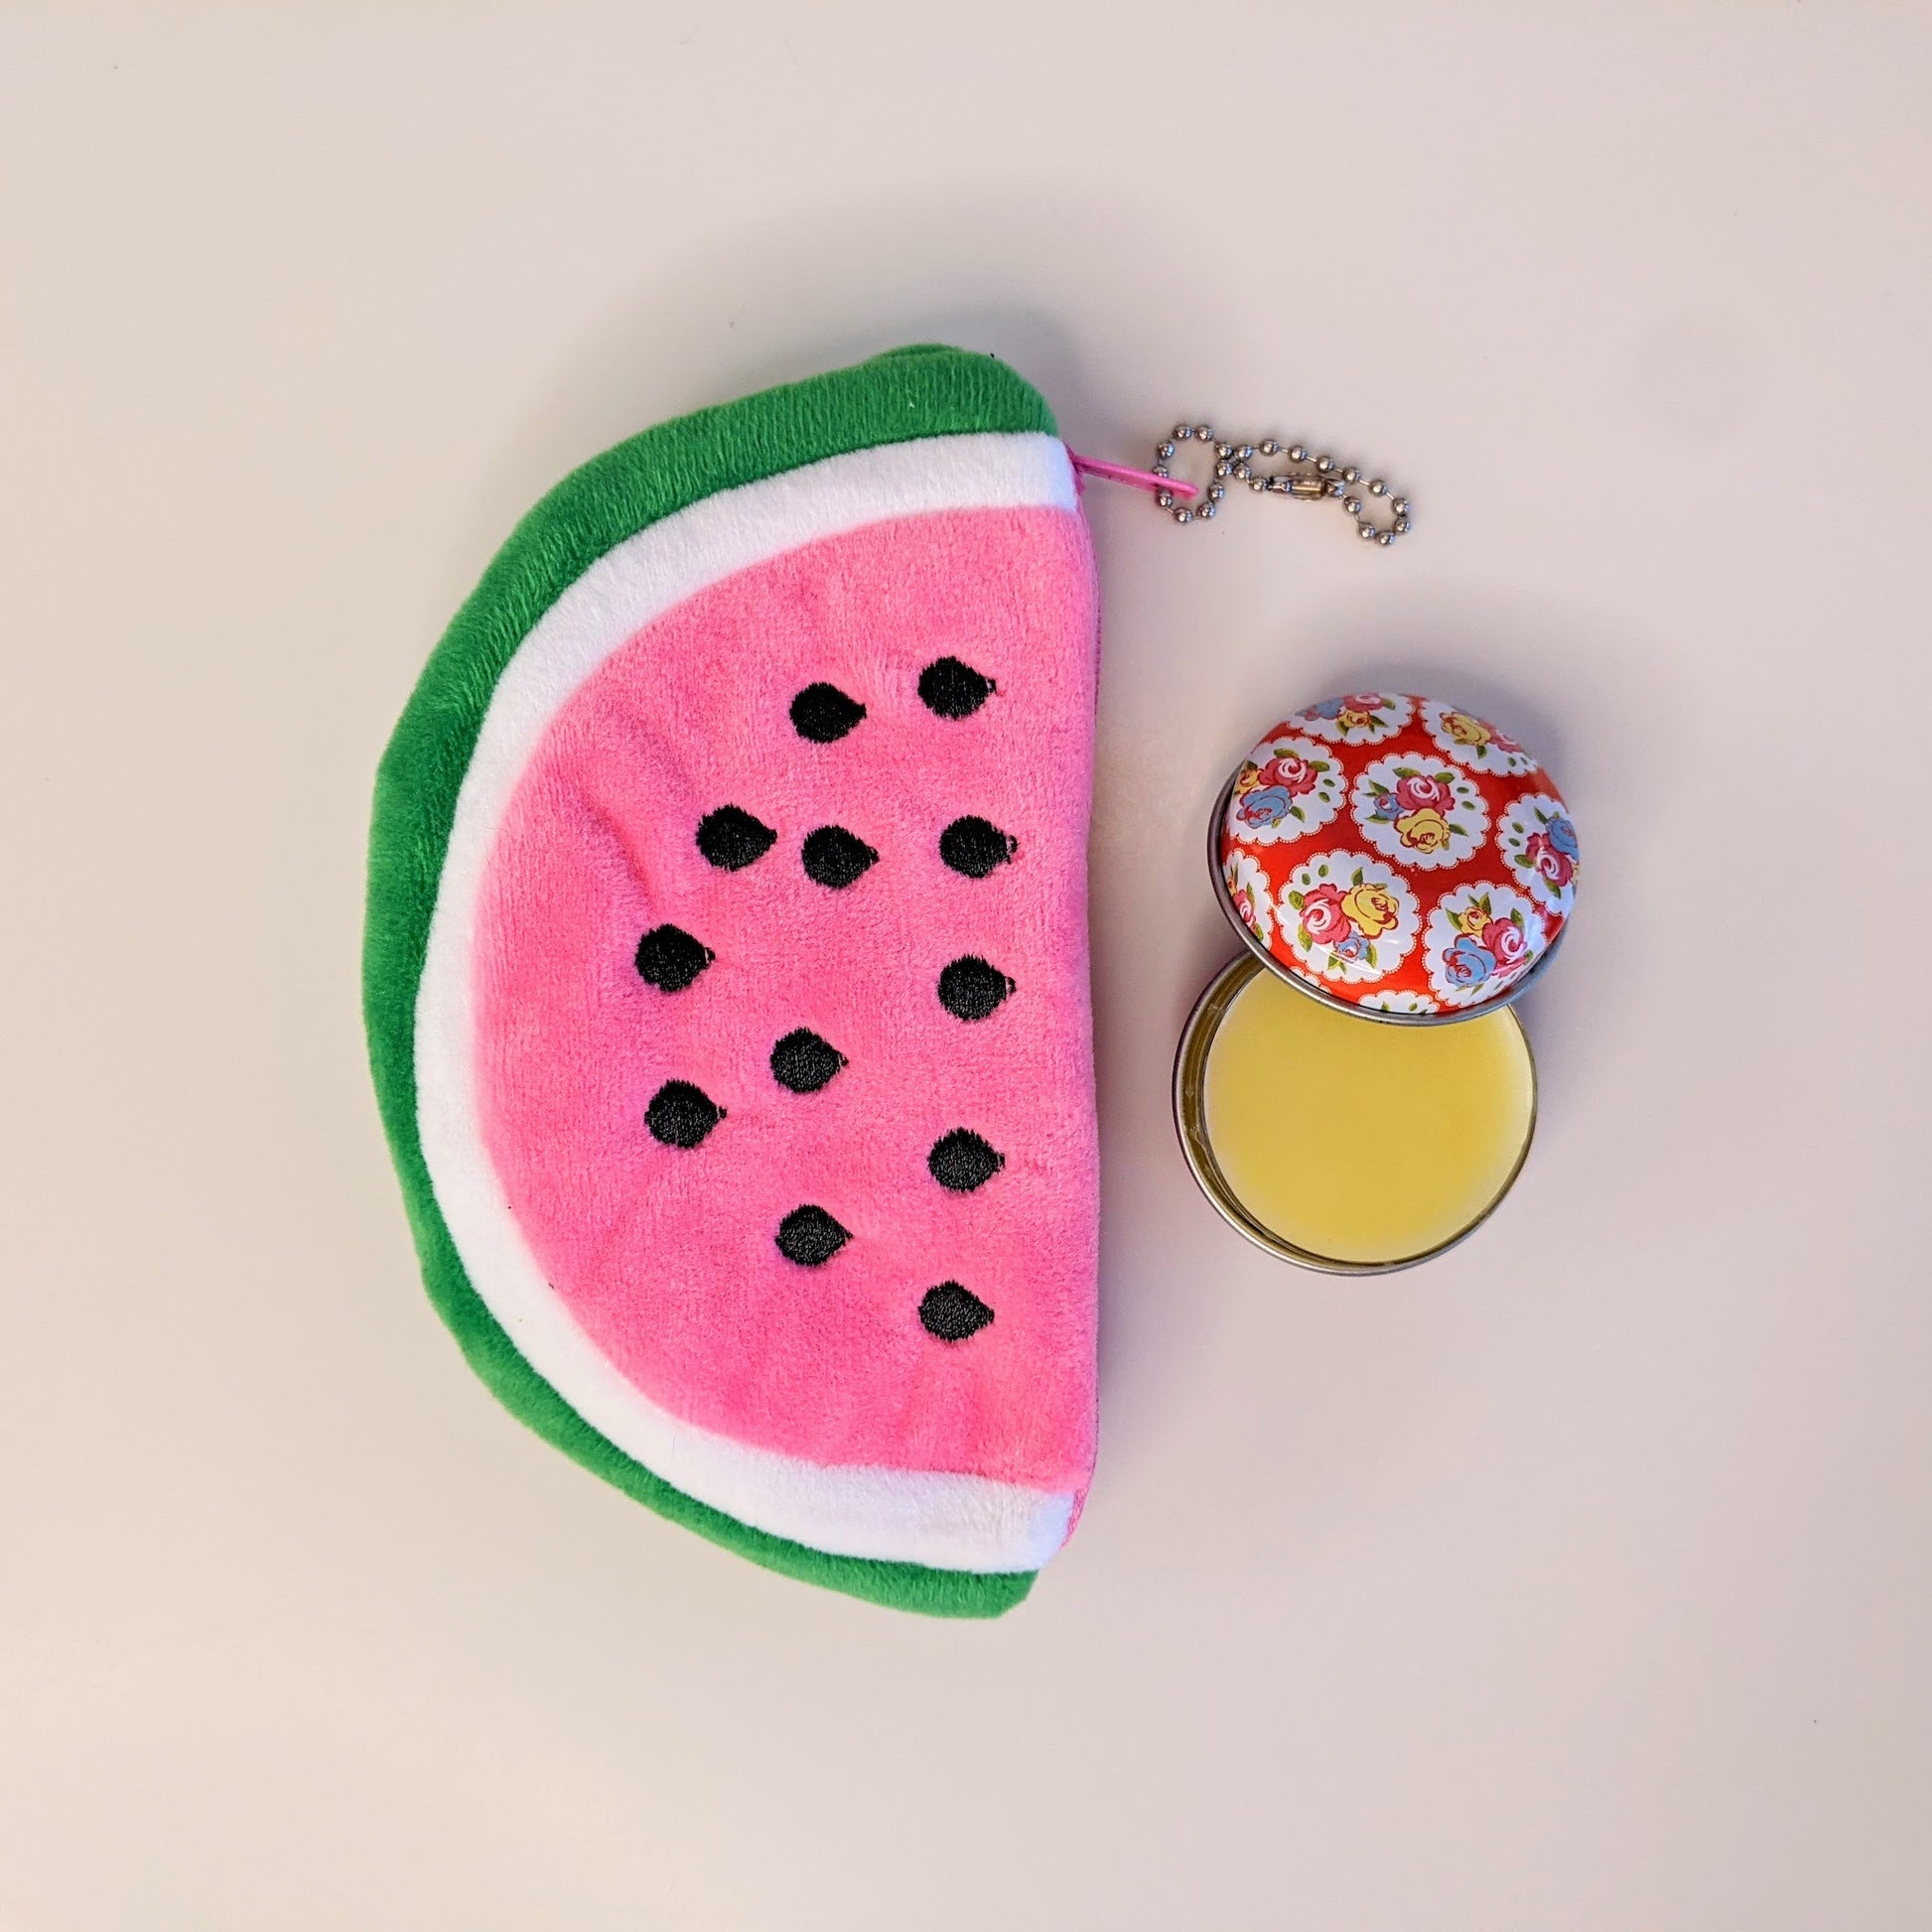 A soft plush coin purse in the shape of a watermelon slice next to an open tin of beeswax lip balm.